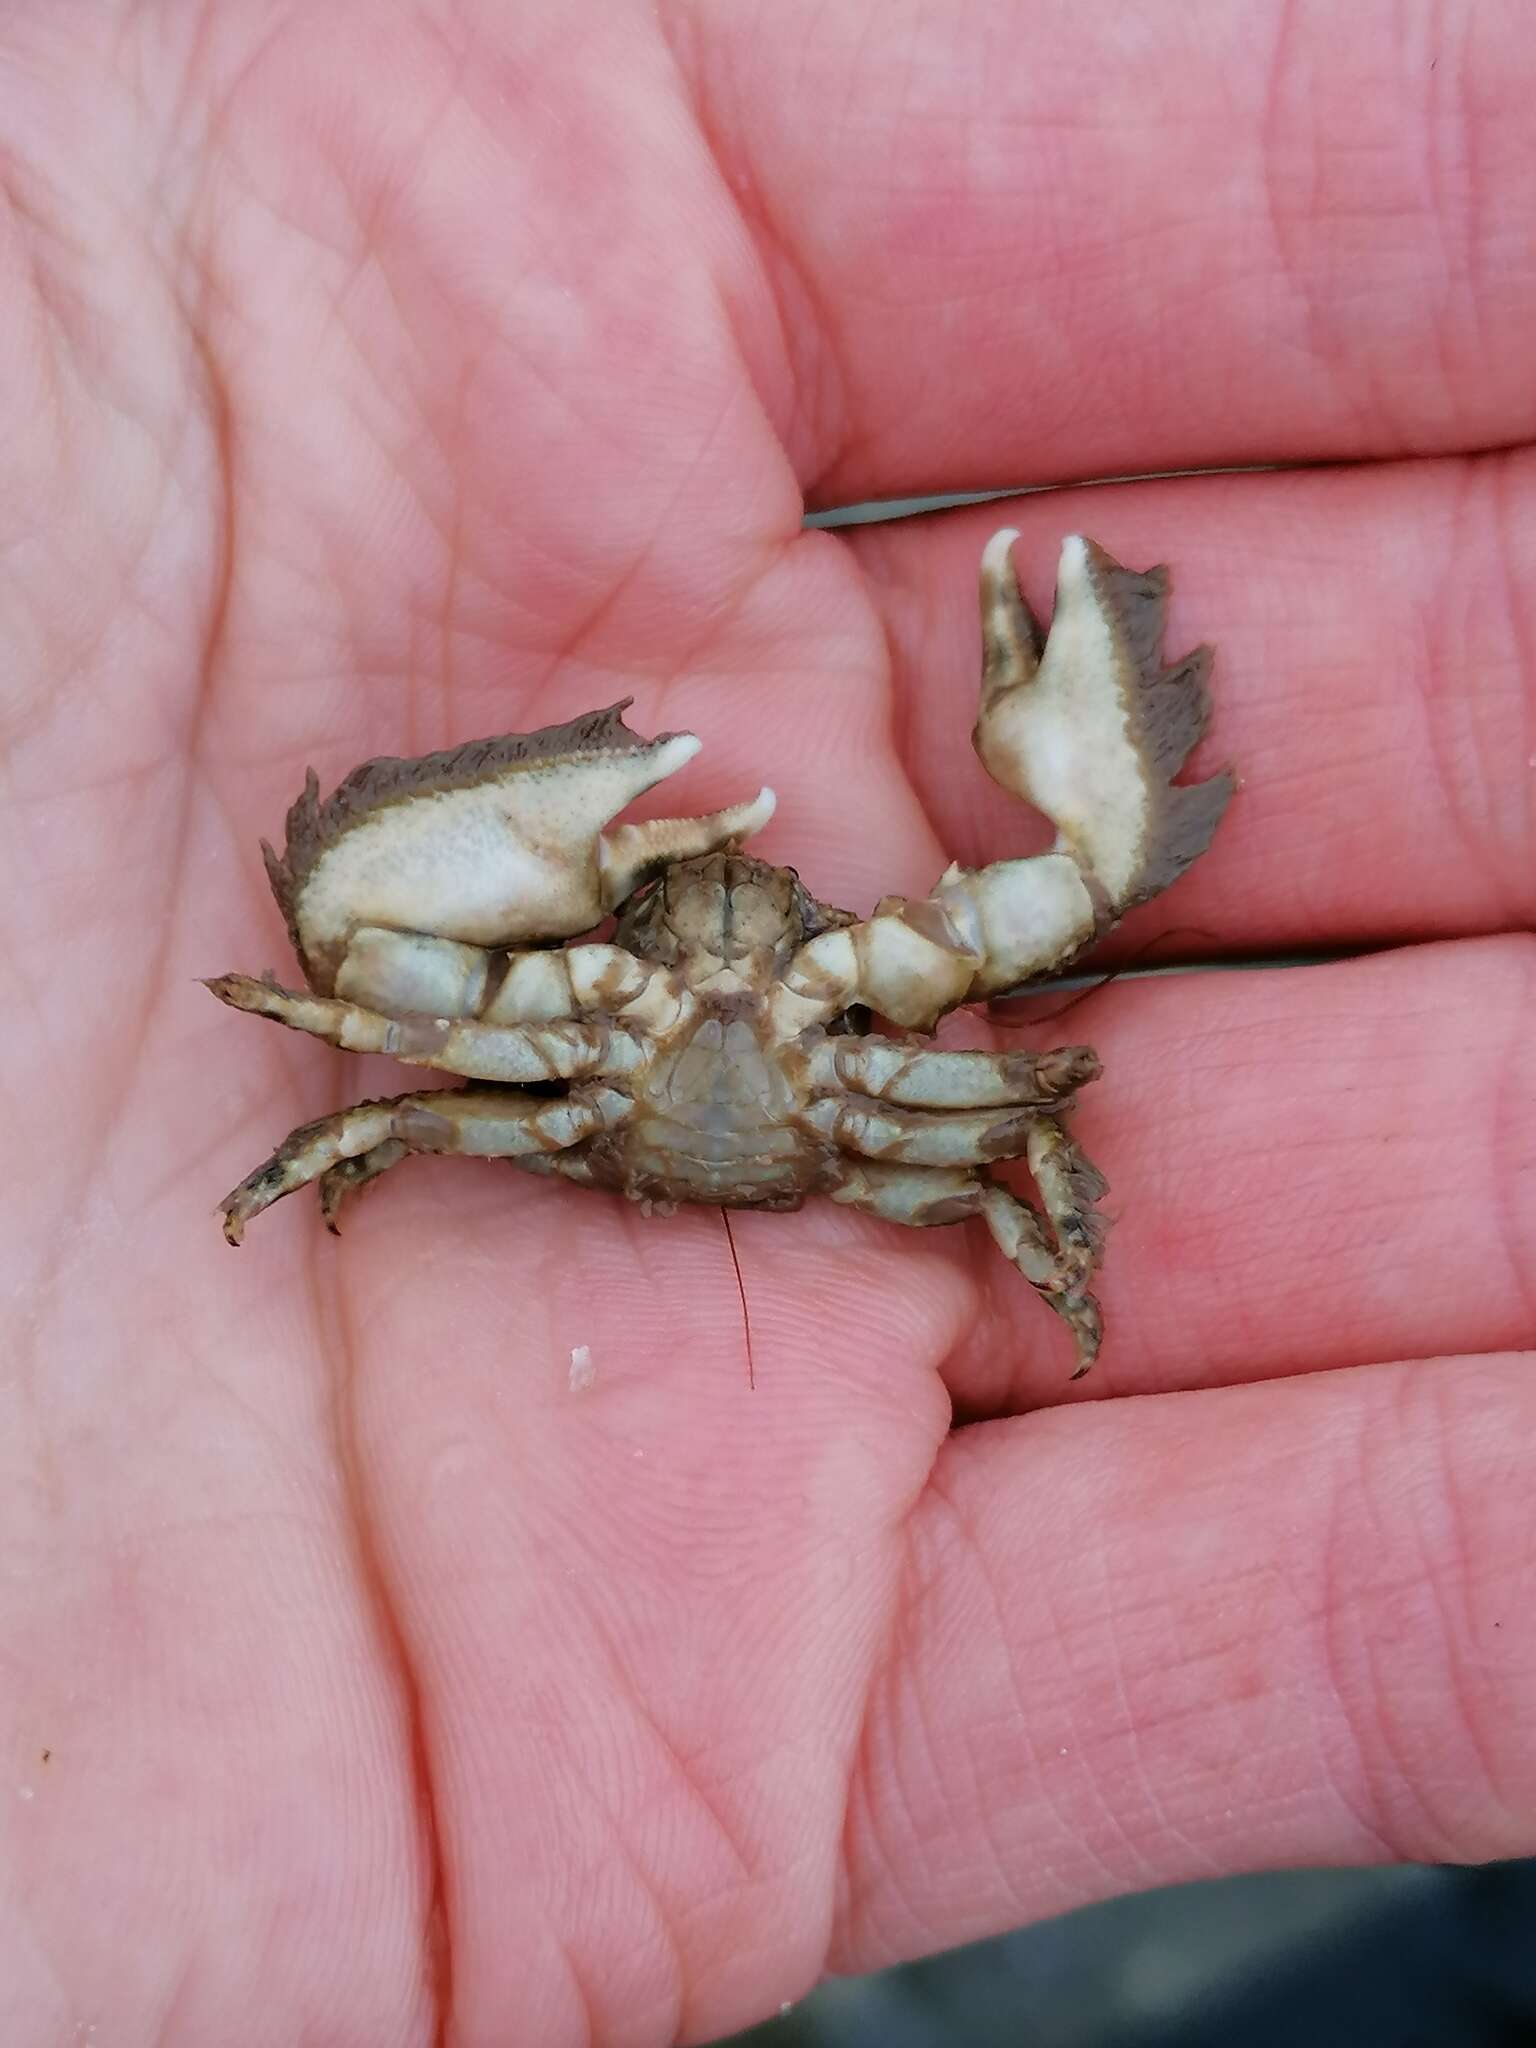 Image of broad-clawed porcelain crab